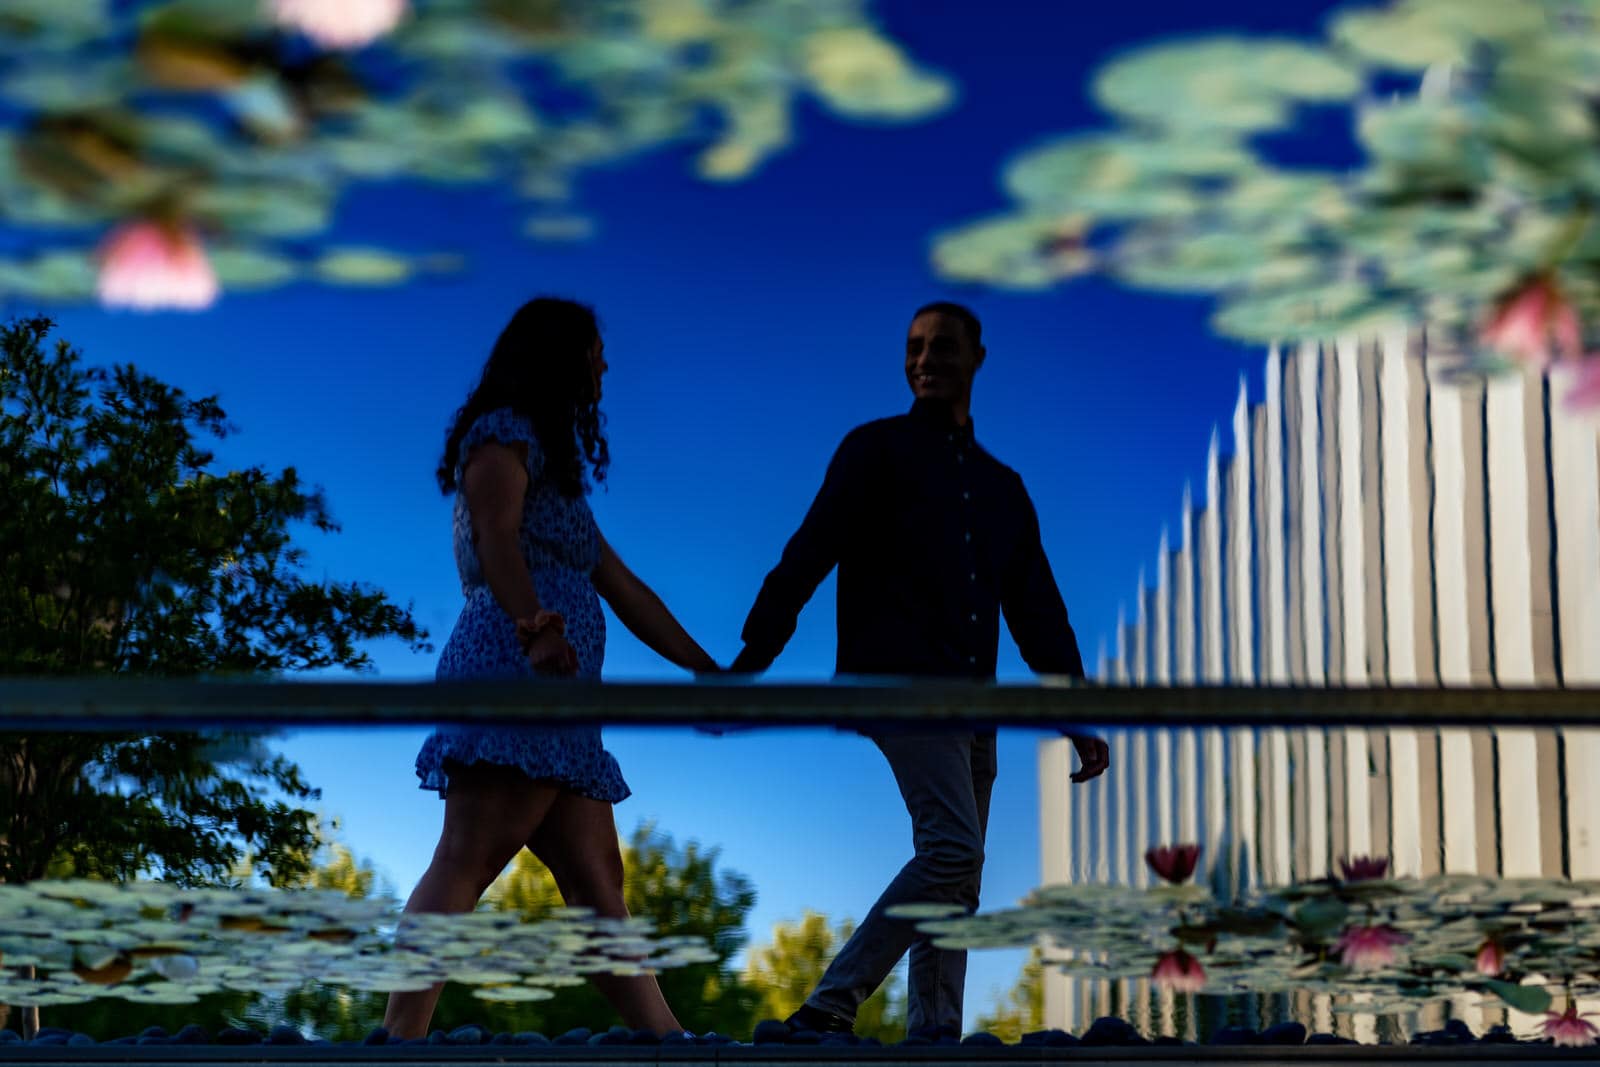 North Carolina Museum of Art park is perfect for engagement photos